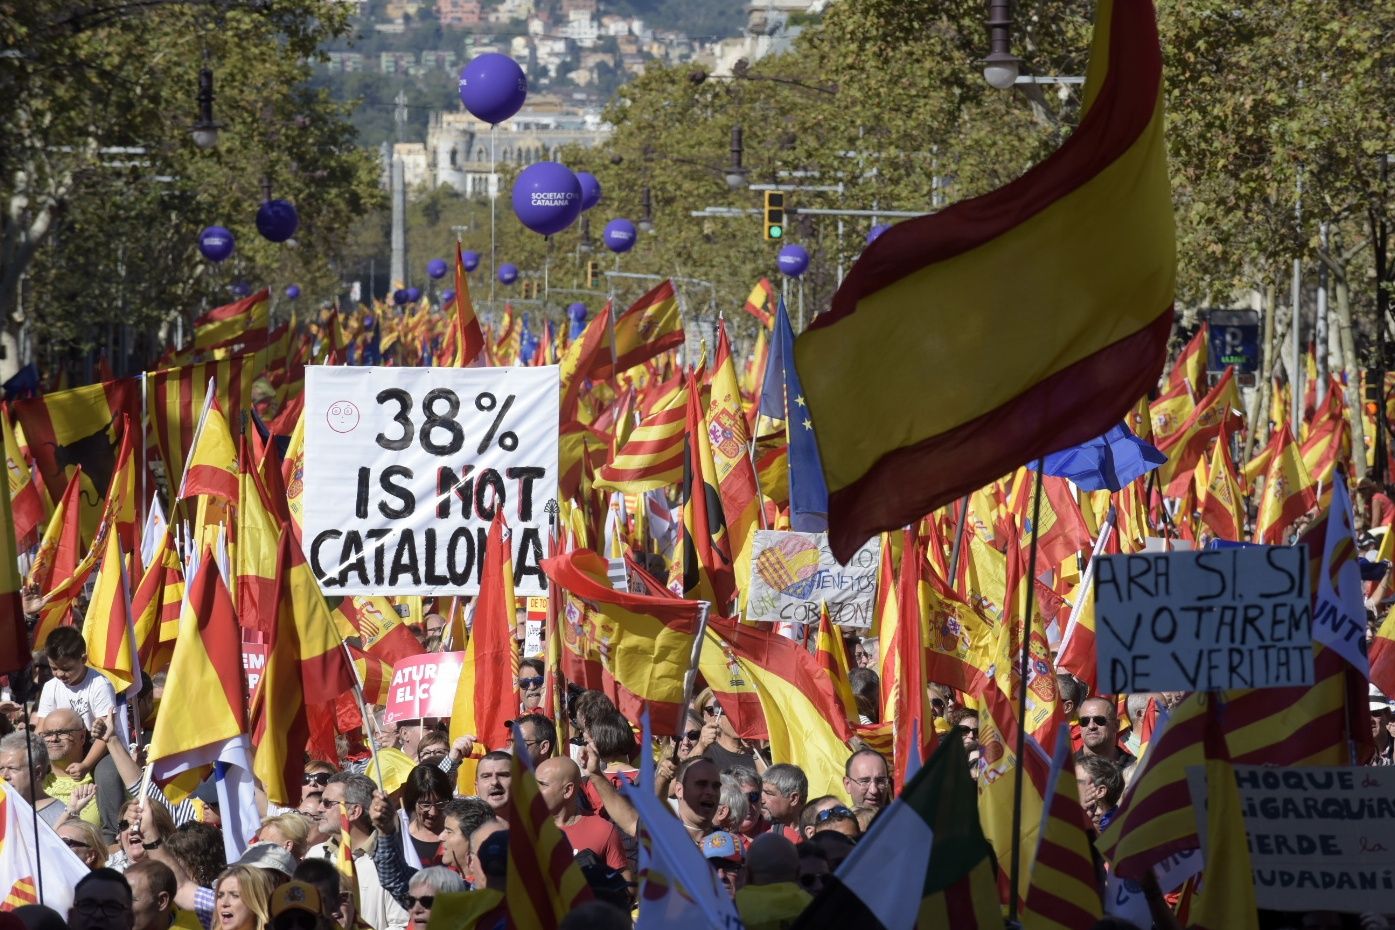 Unionists again demand prison for Puigdemont in Barcelona march